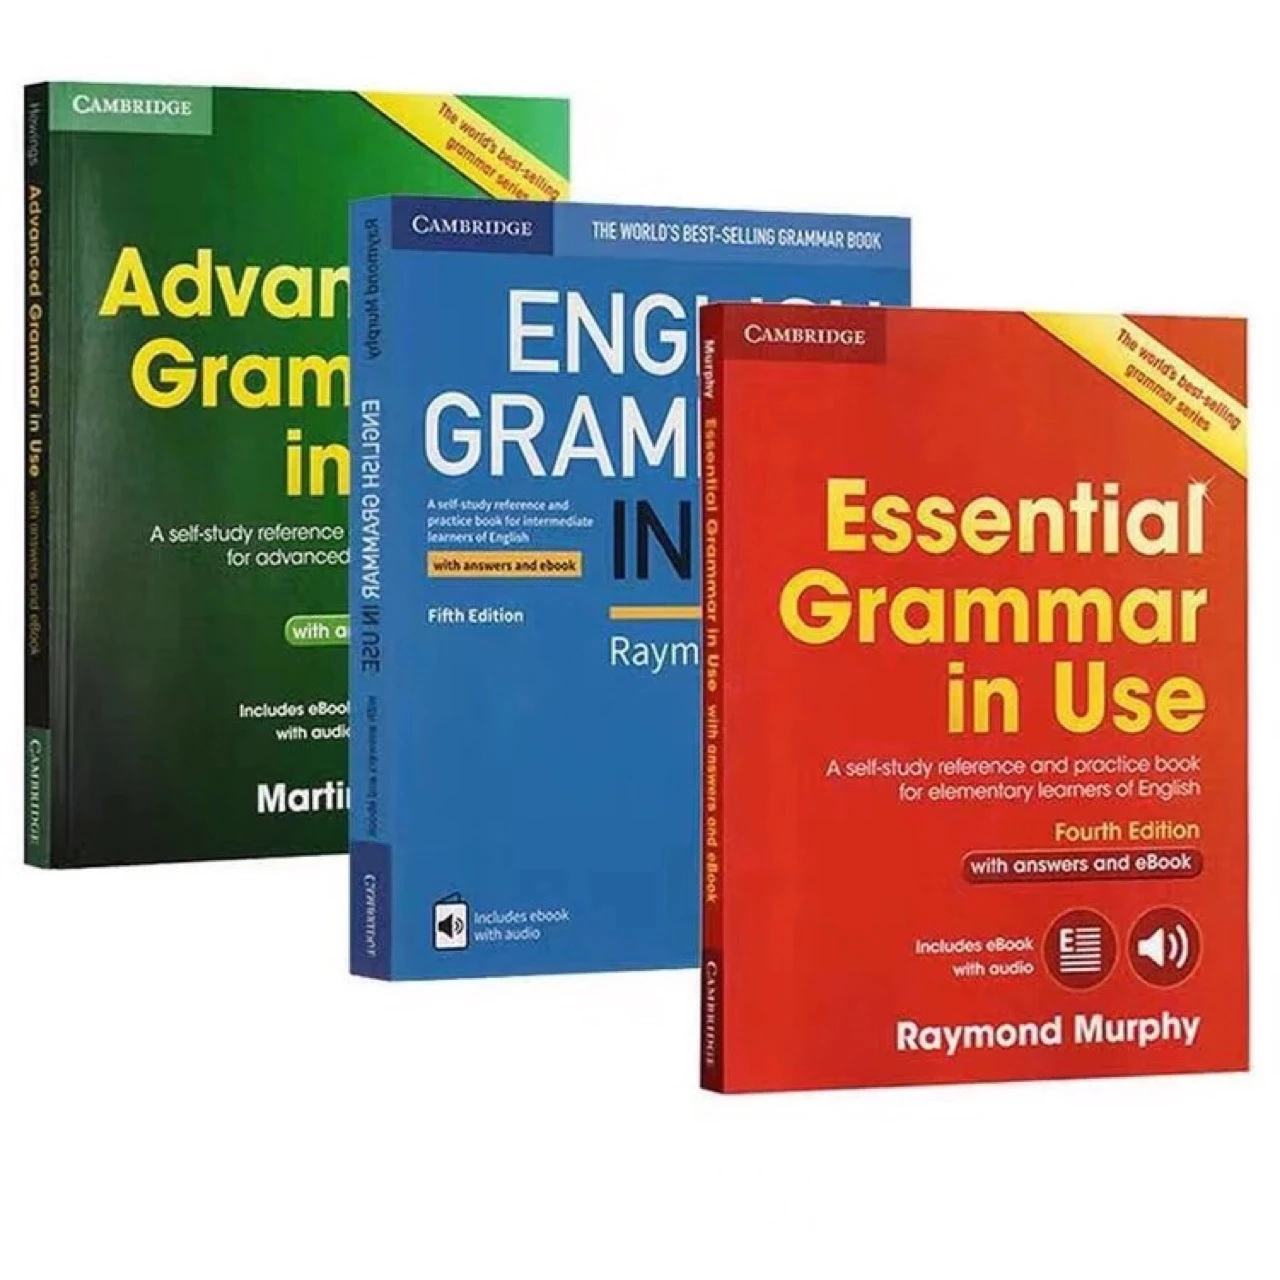 

Cambridge English Grammar, Elementary Intermediate Advanced English Reference Book and Workbook Book Collection